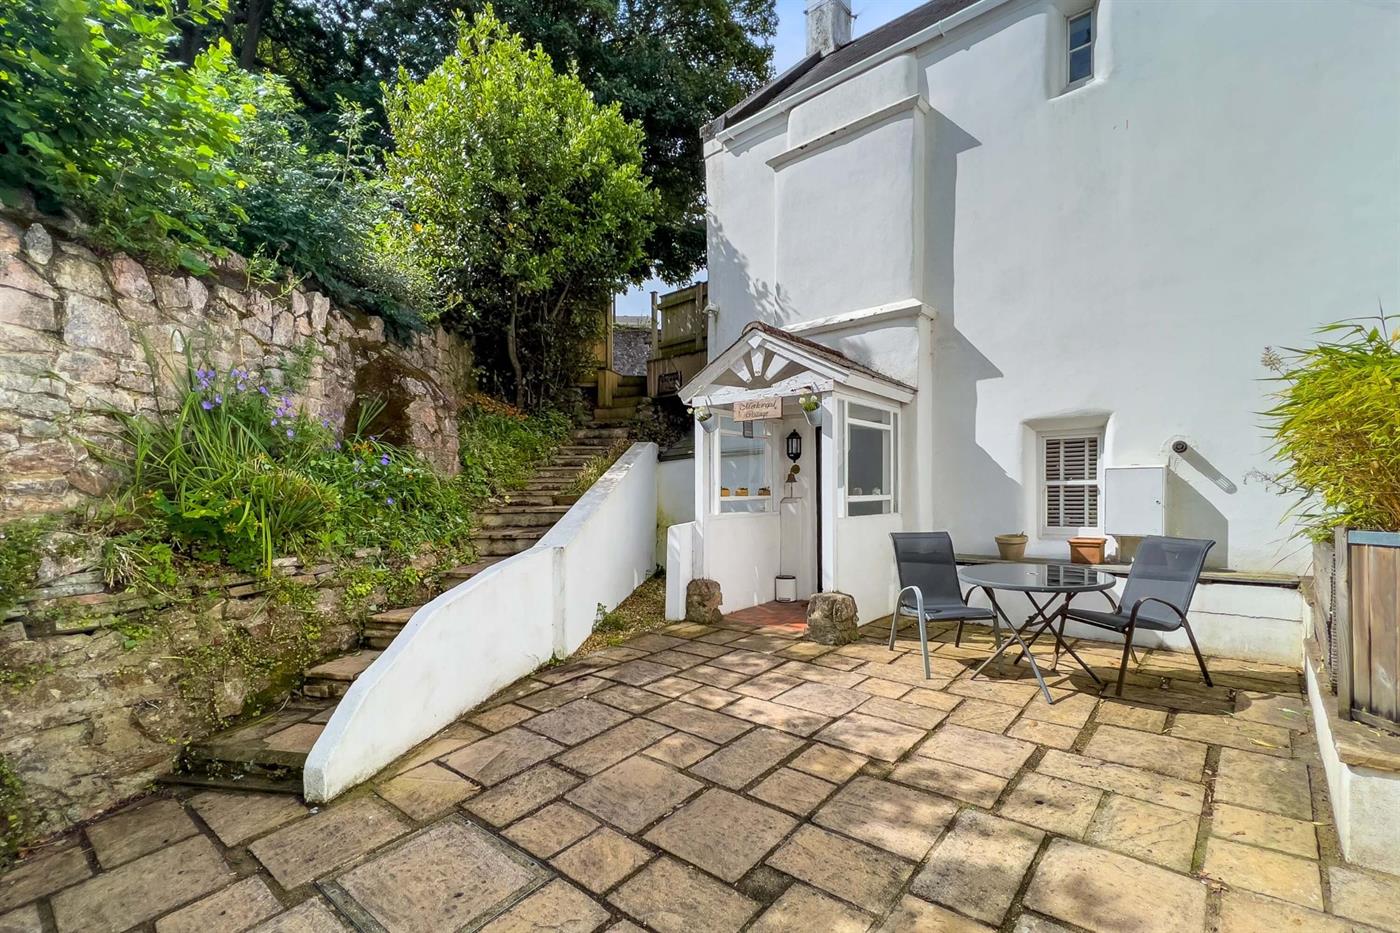 2 Bedroom Semi-Detached House for Sale: Merlewood Cottage, Meadfoot Road, Torquay, TQ1 2JP